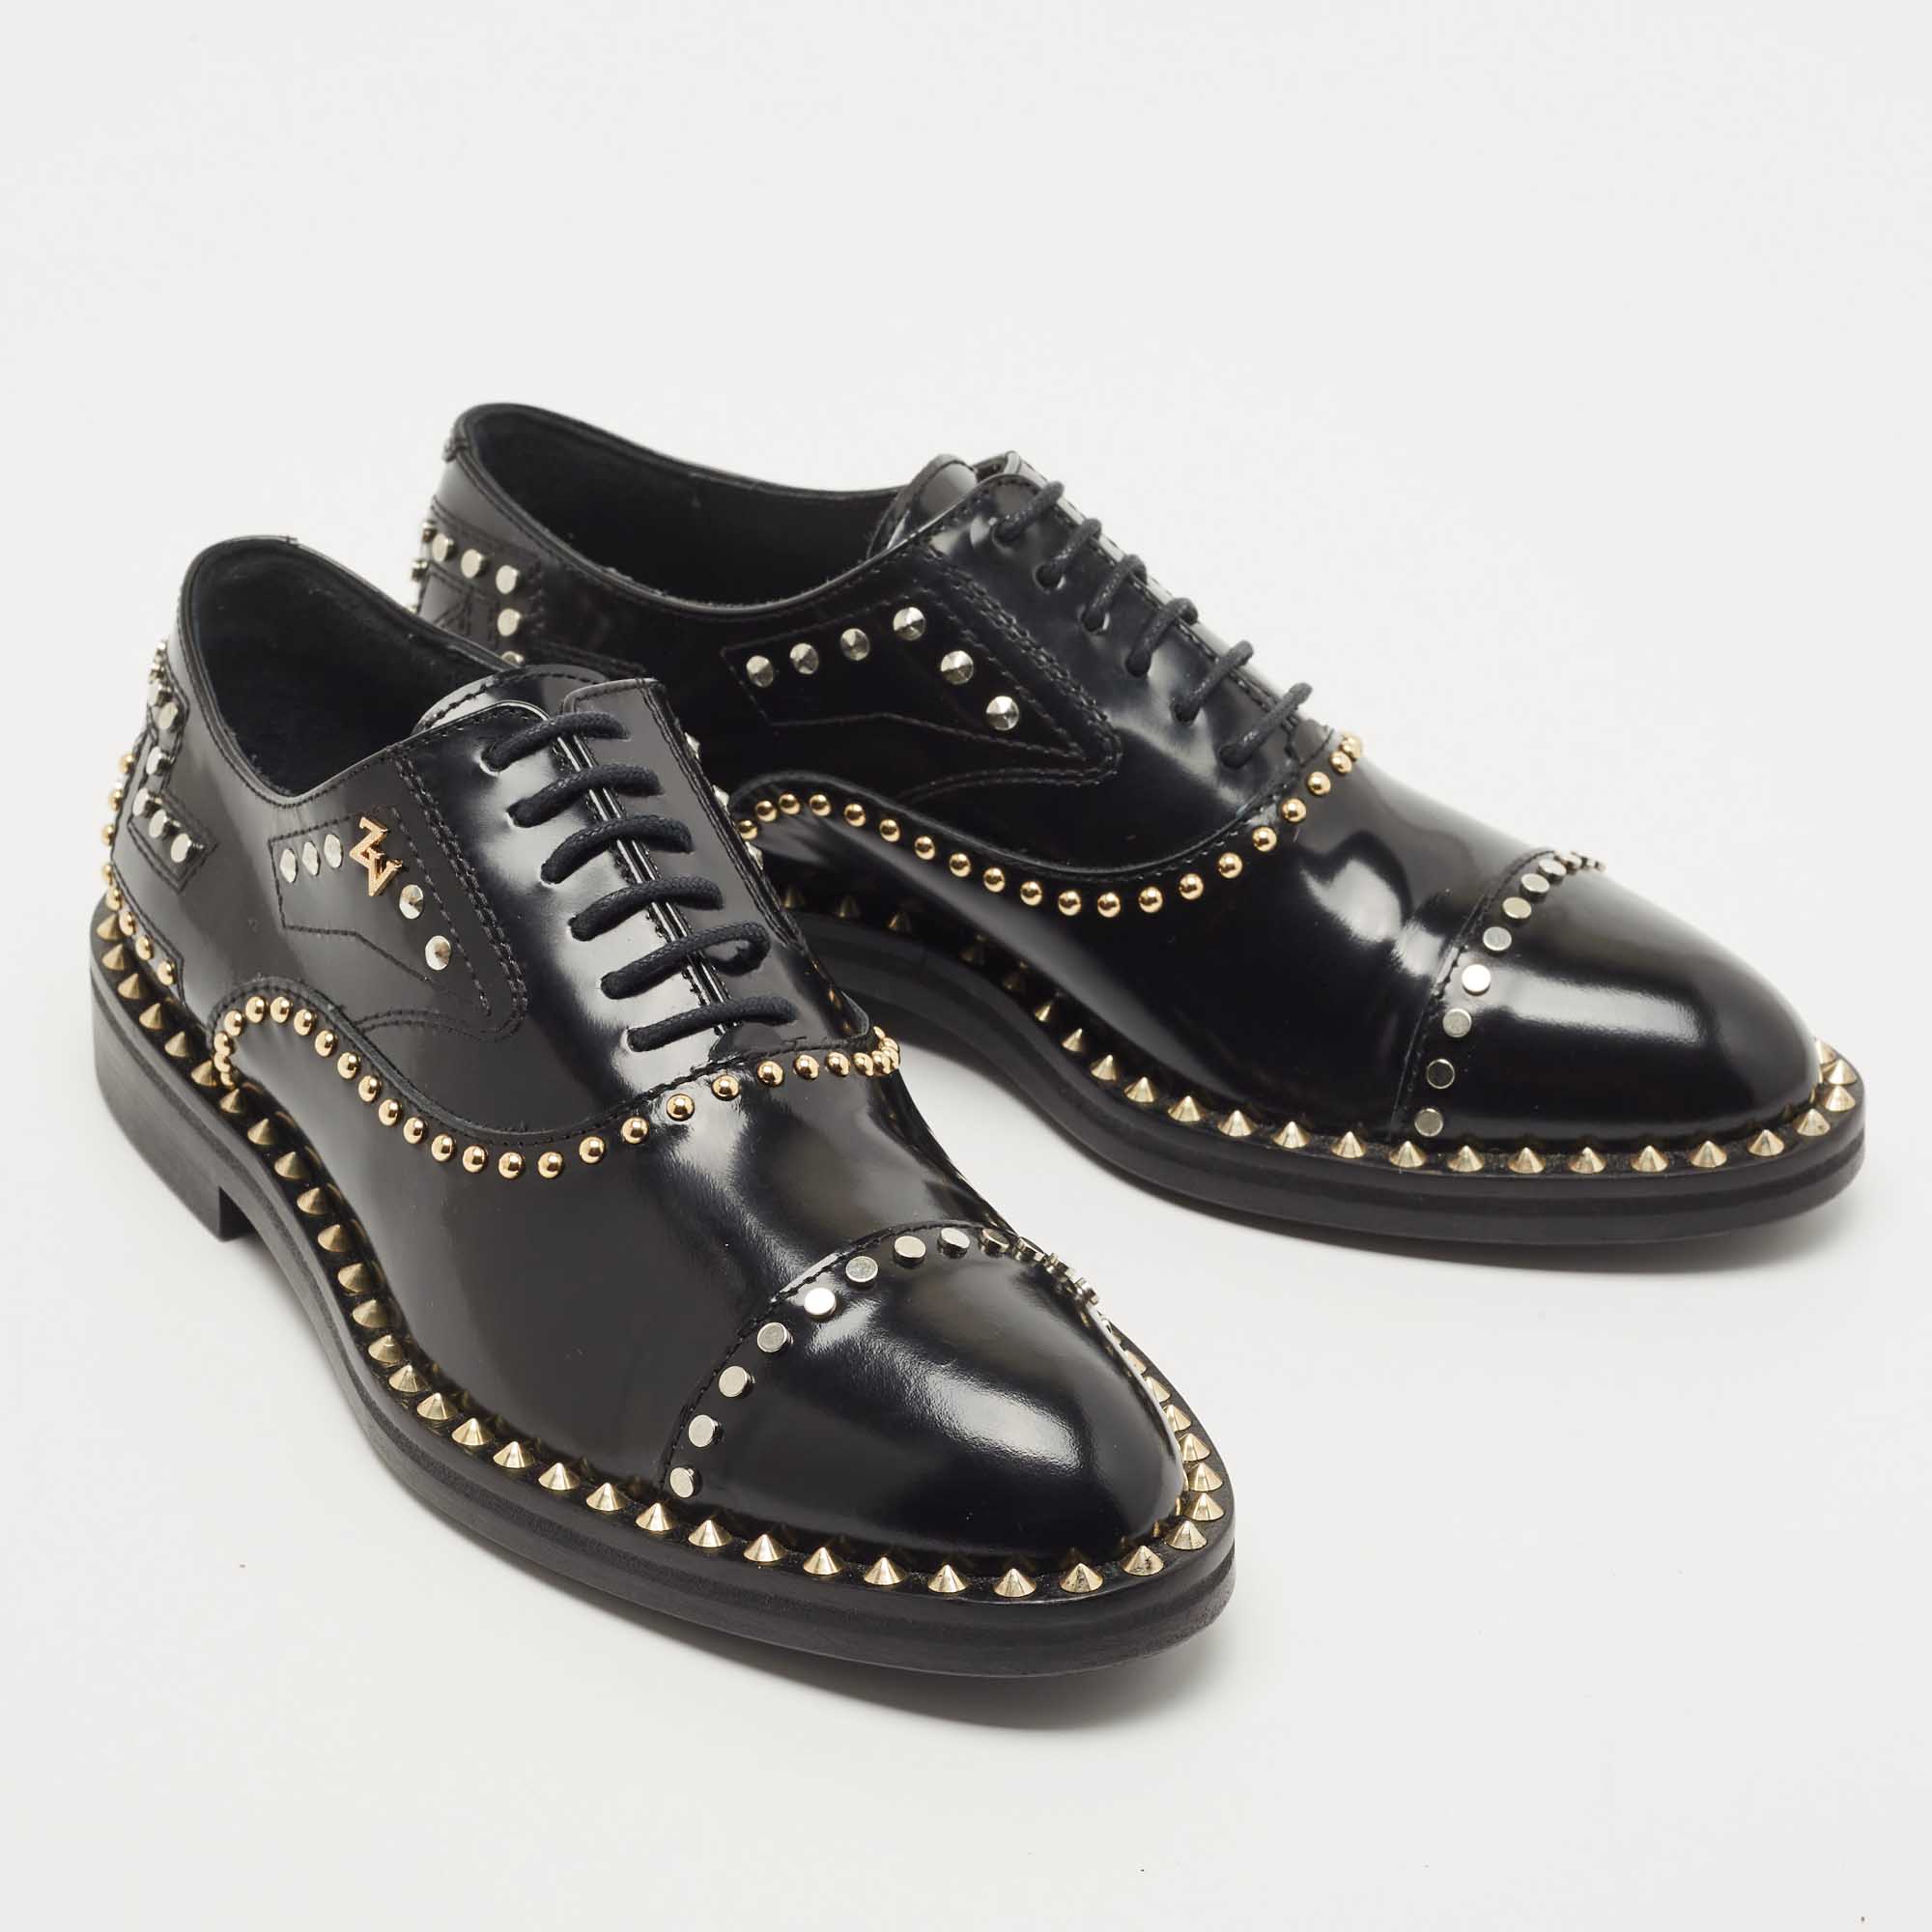 Zadig & Voltaire Black Leather Studded Youth Clous Oxfords Size 36